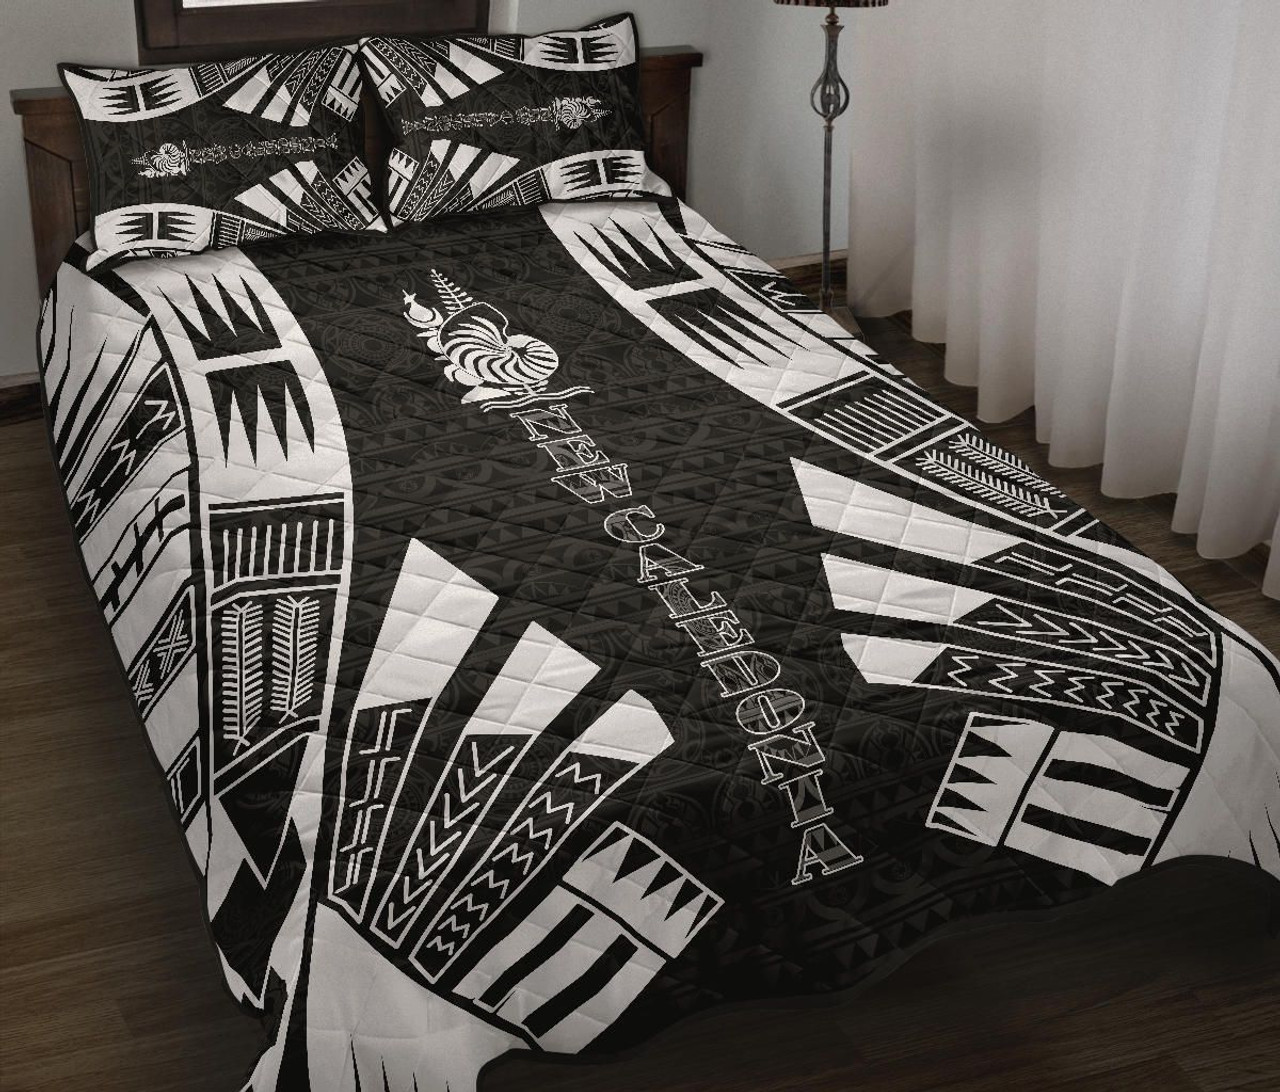 New Caledonia Quilt Bed Set - New Caledonia Coat Of Arms & Polynesian White Tattoo Style 2